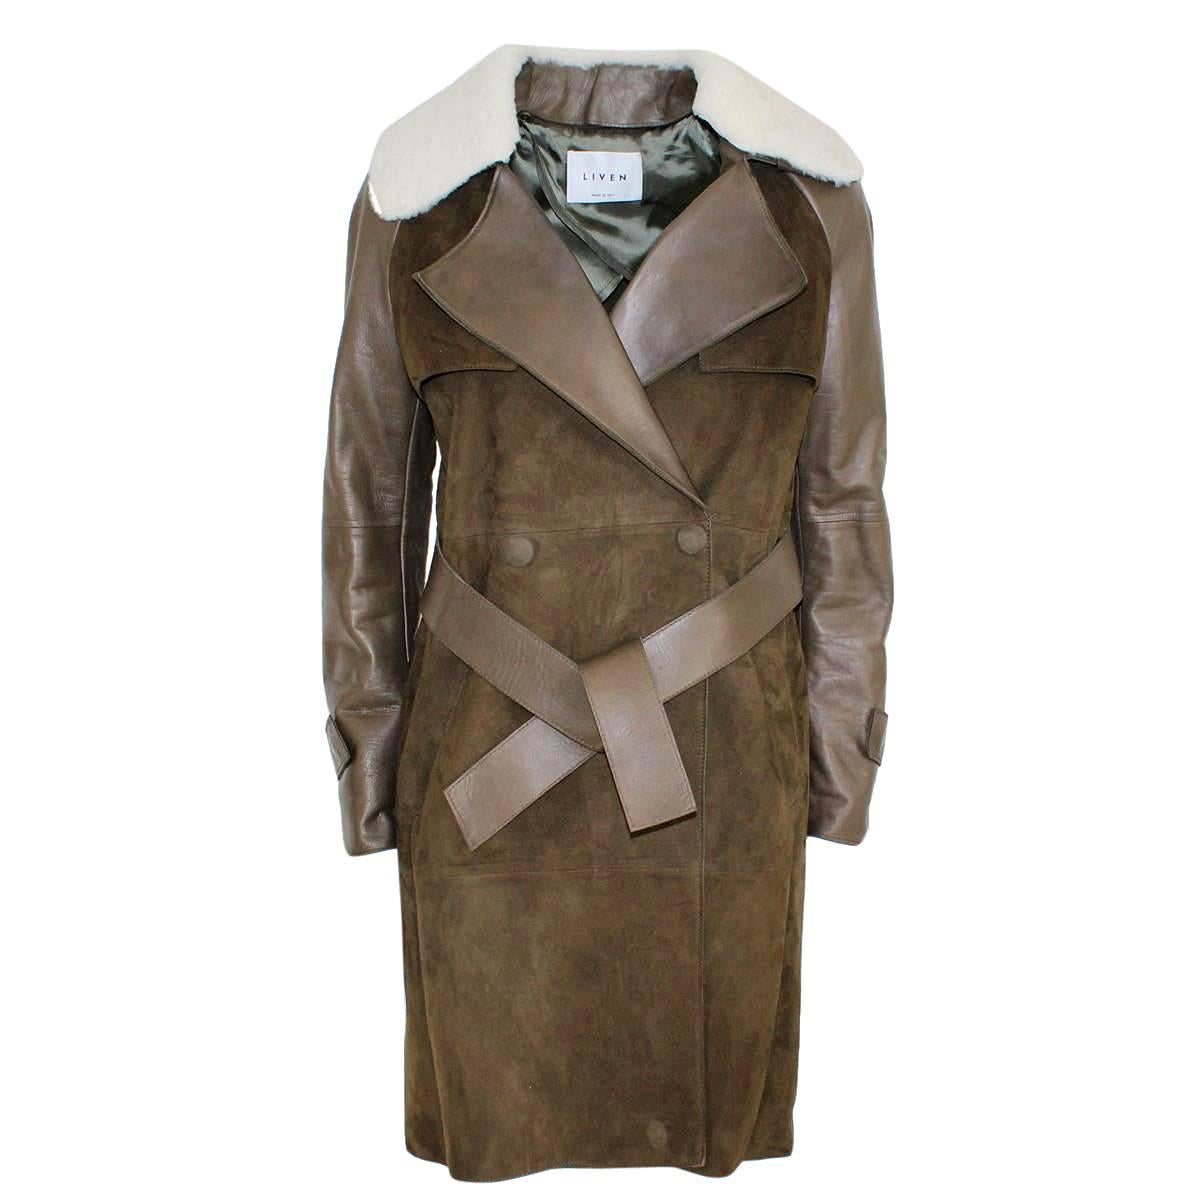 Liven Italy Lamb Shearling Coat 40 For Sale